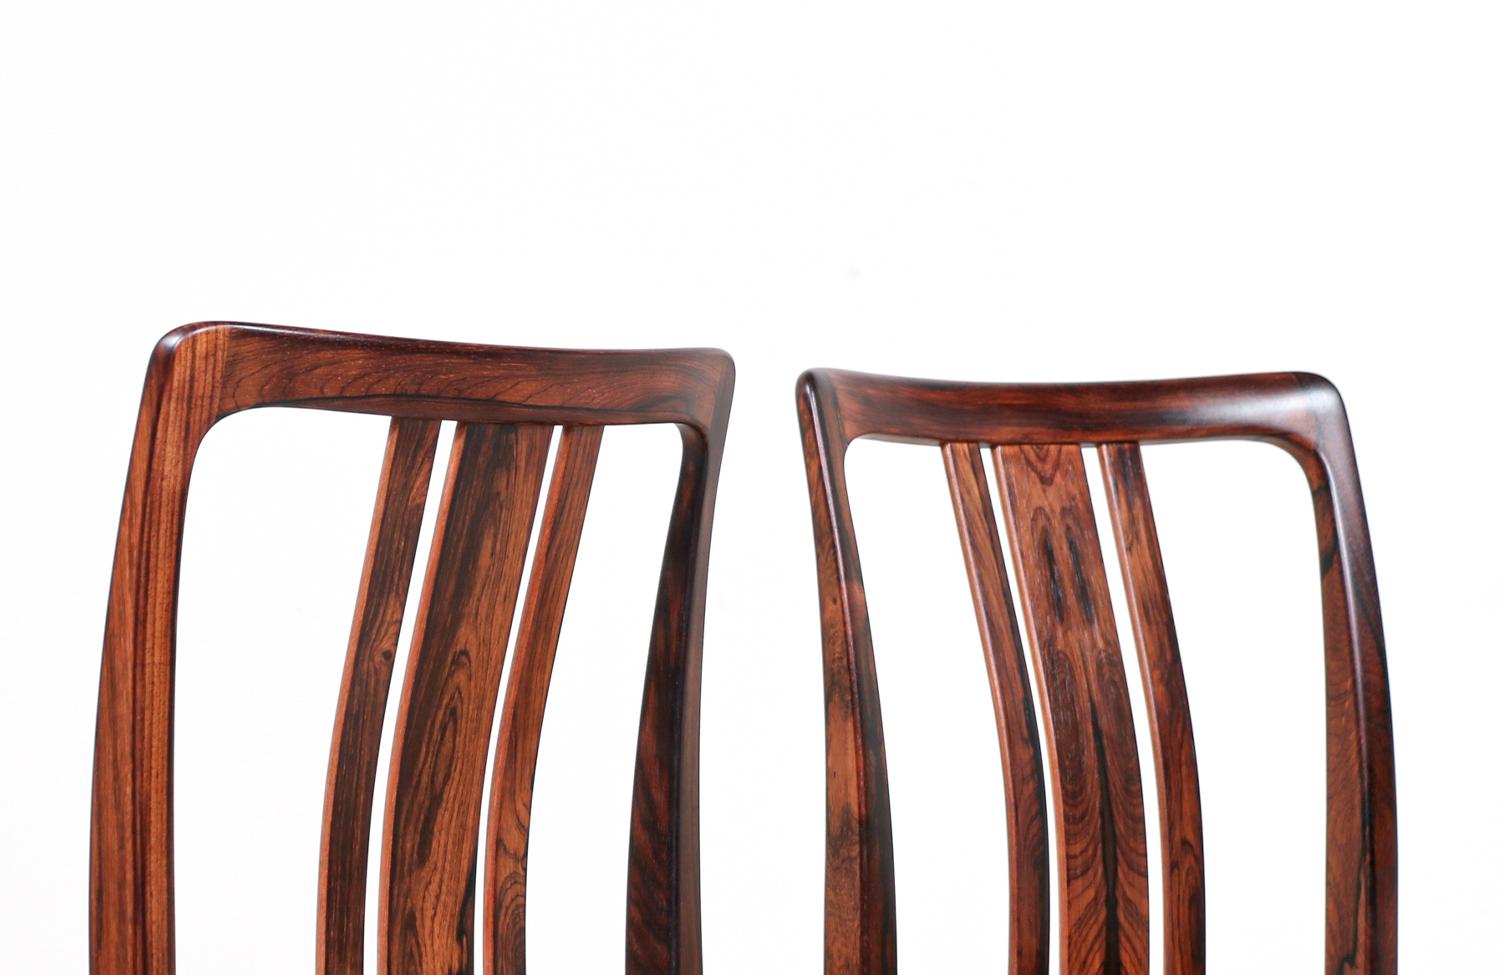 Mid-20th Century Swedish Modern Rosewood & Leather Dining Chairs by Linde Nilsson